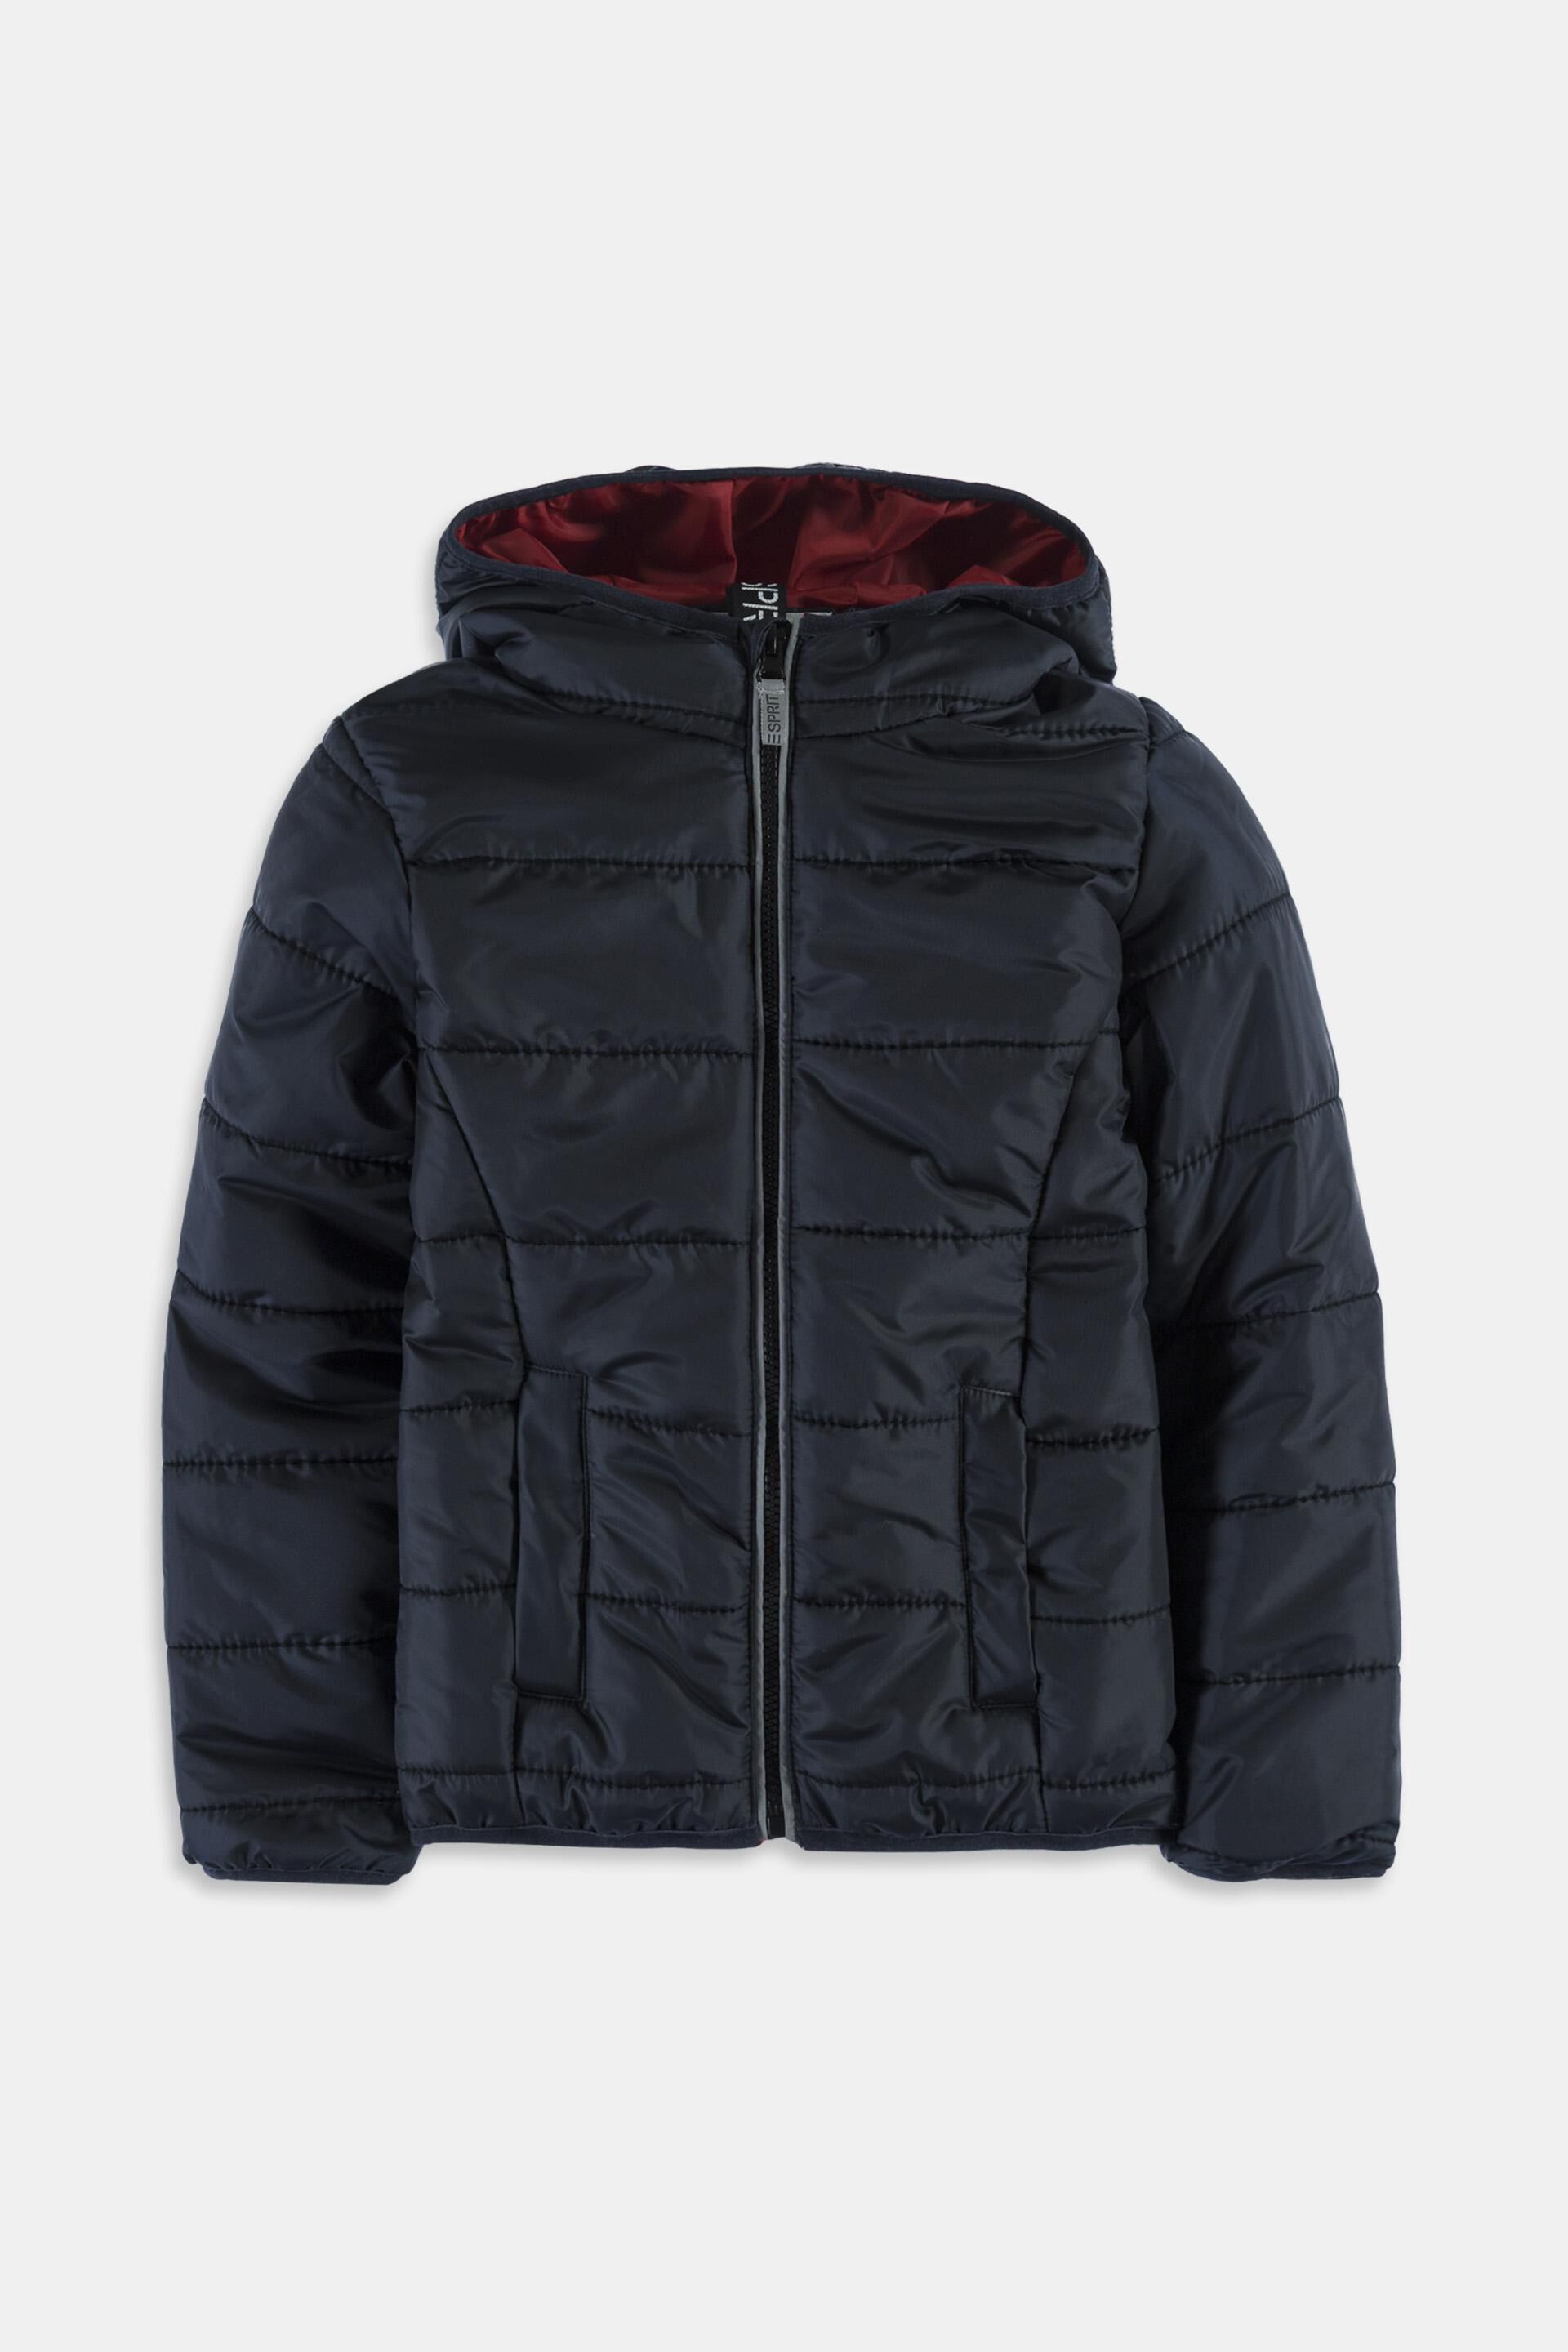 Esprit jacket with quilted a hood Padded